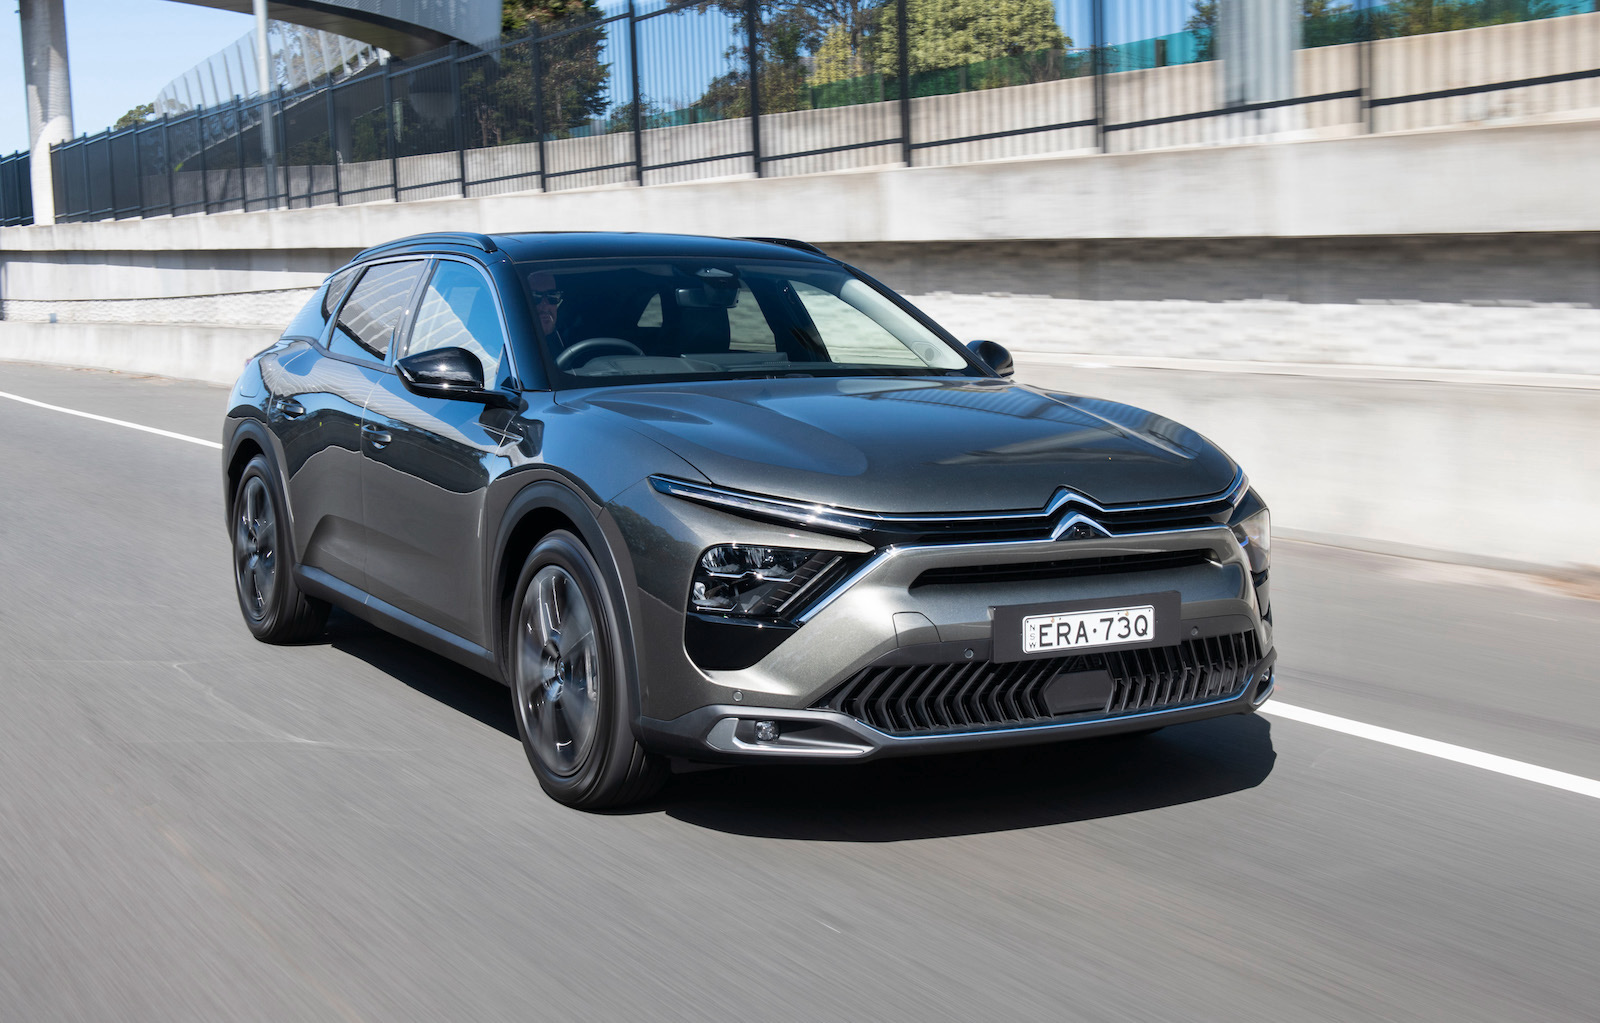 2023 Citroen C5 X now on sale in Australia, priced from $57,670